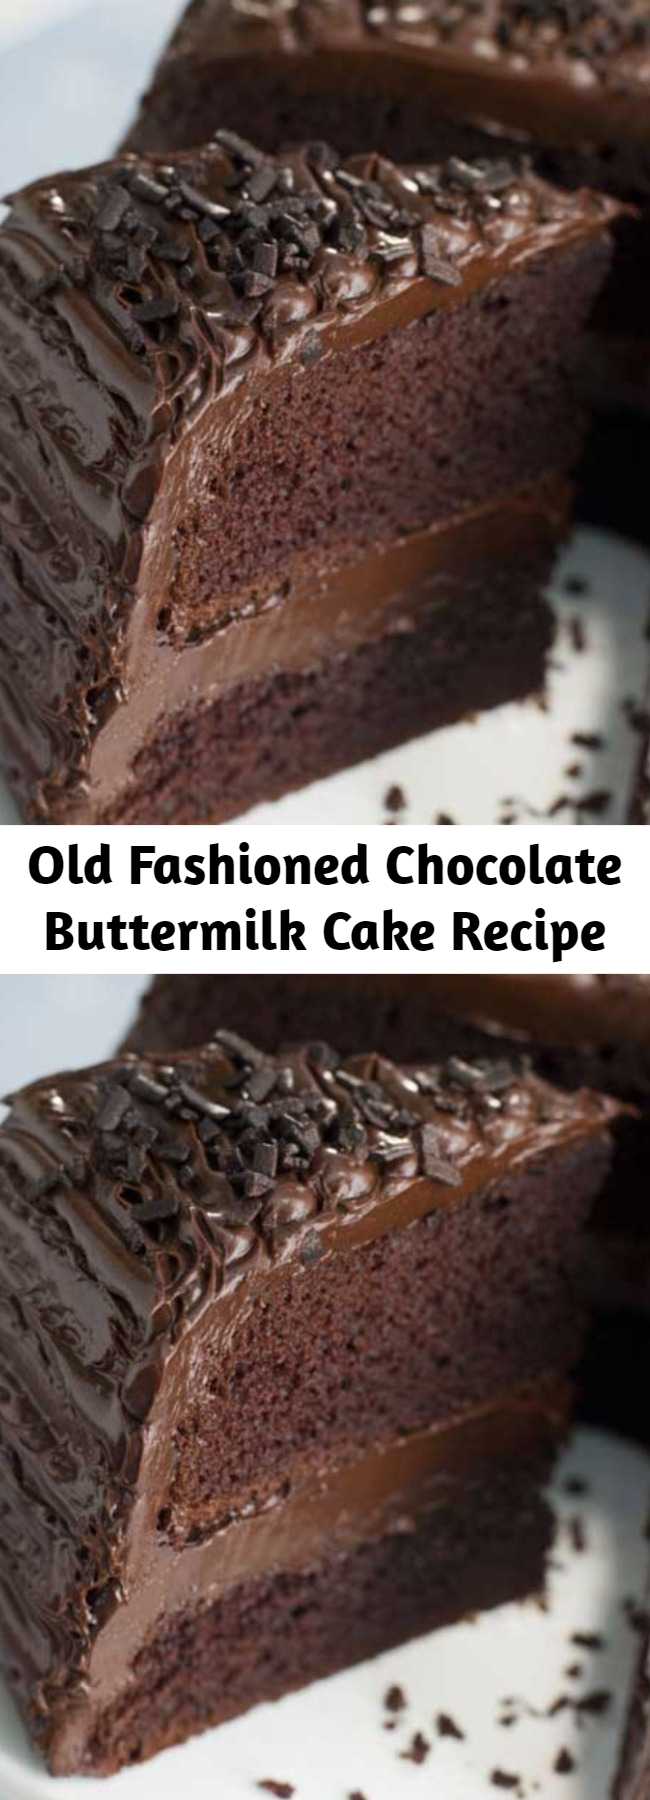 Old Fashioned Chocolate Buttermilk Cake Recipe - The perfect recipe for an old-fashioned chocolate buttermilk cake that is so moist that your guests will think it came from a bakery!